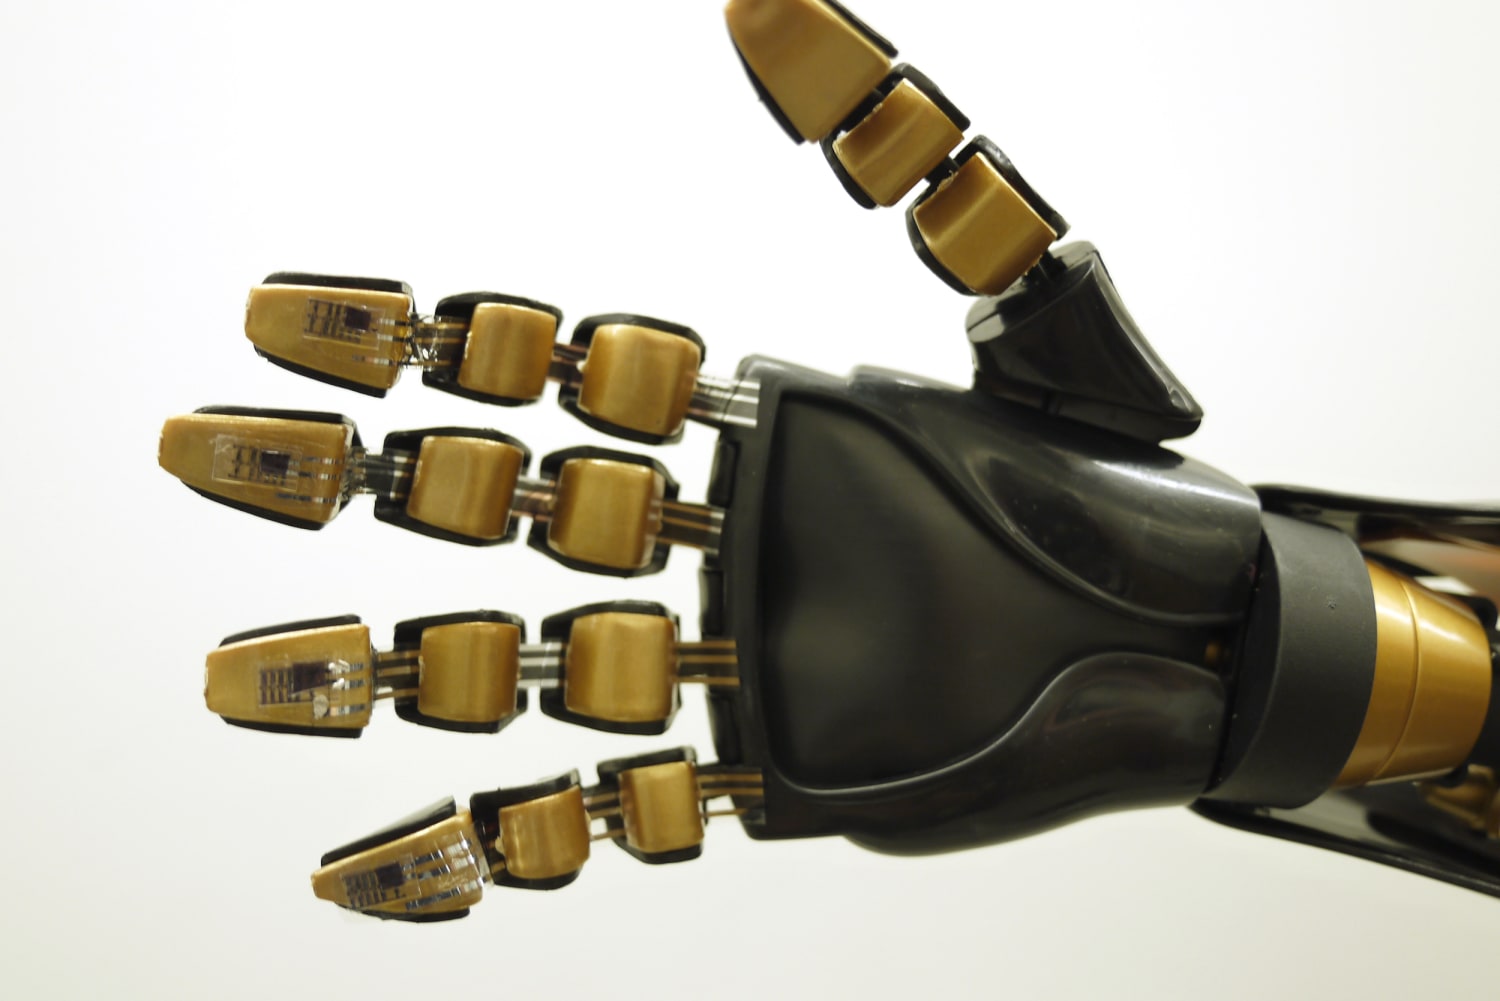 Artificial Skin Could Help